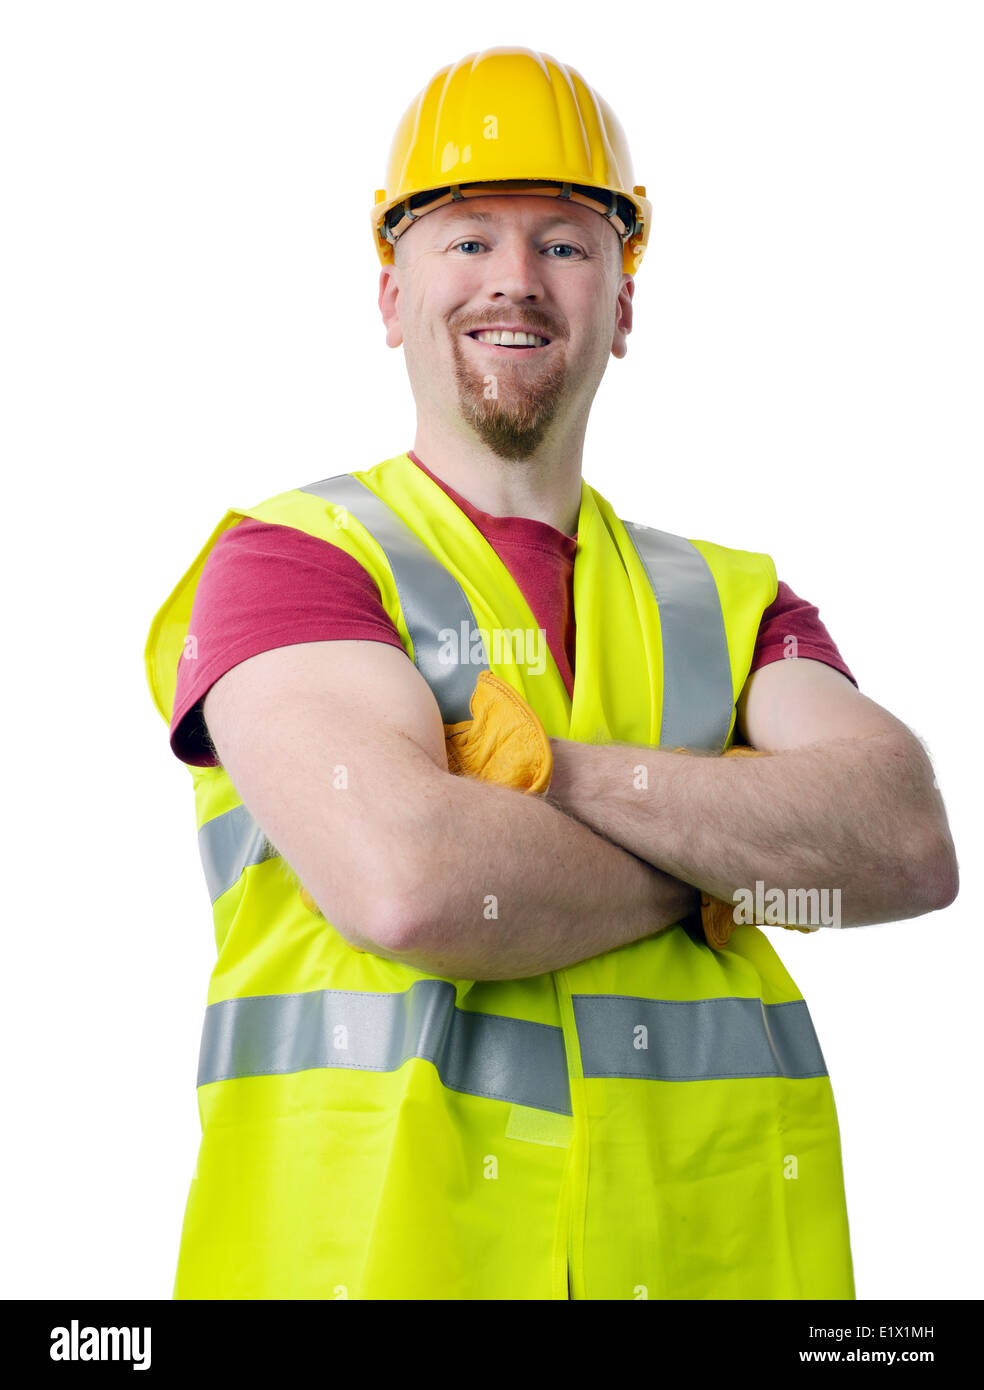 portrait of a construction worker isolated on a white background Stock Photo